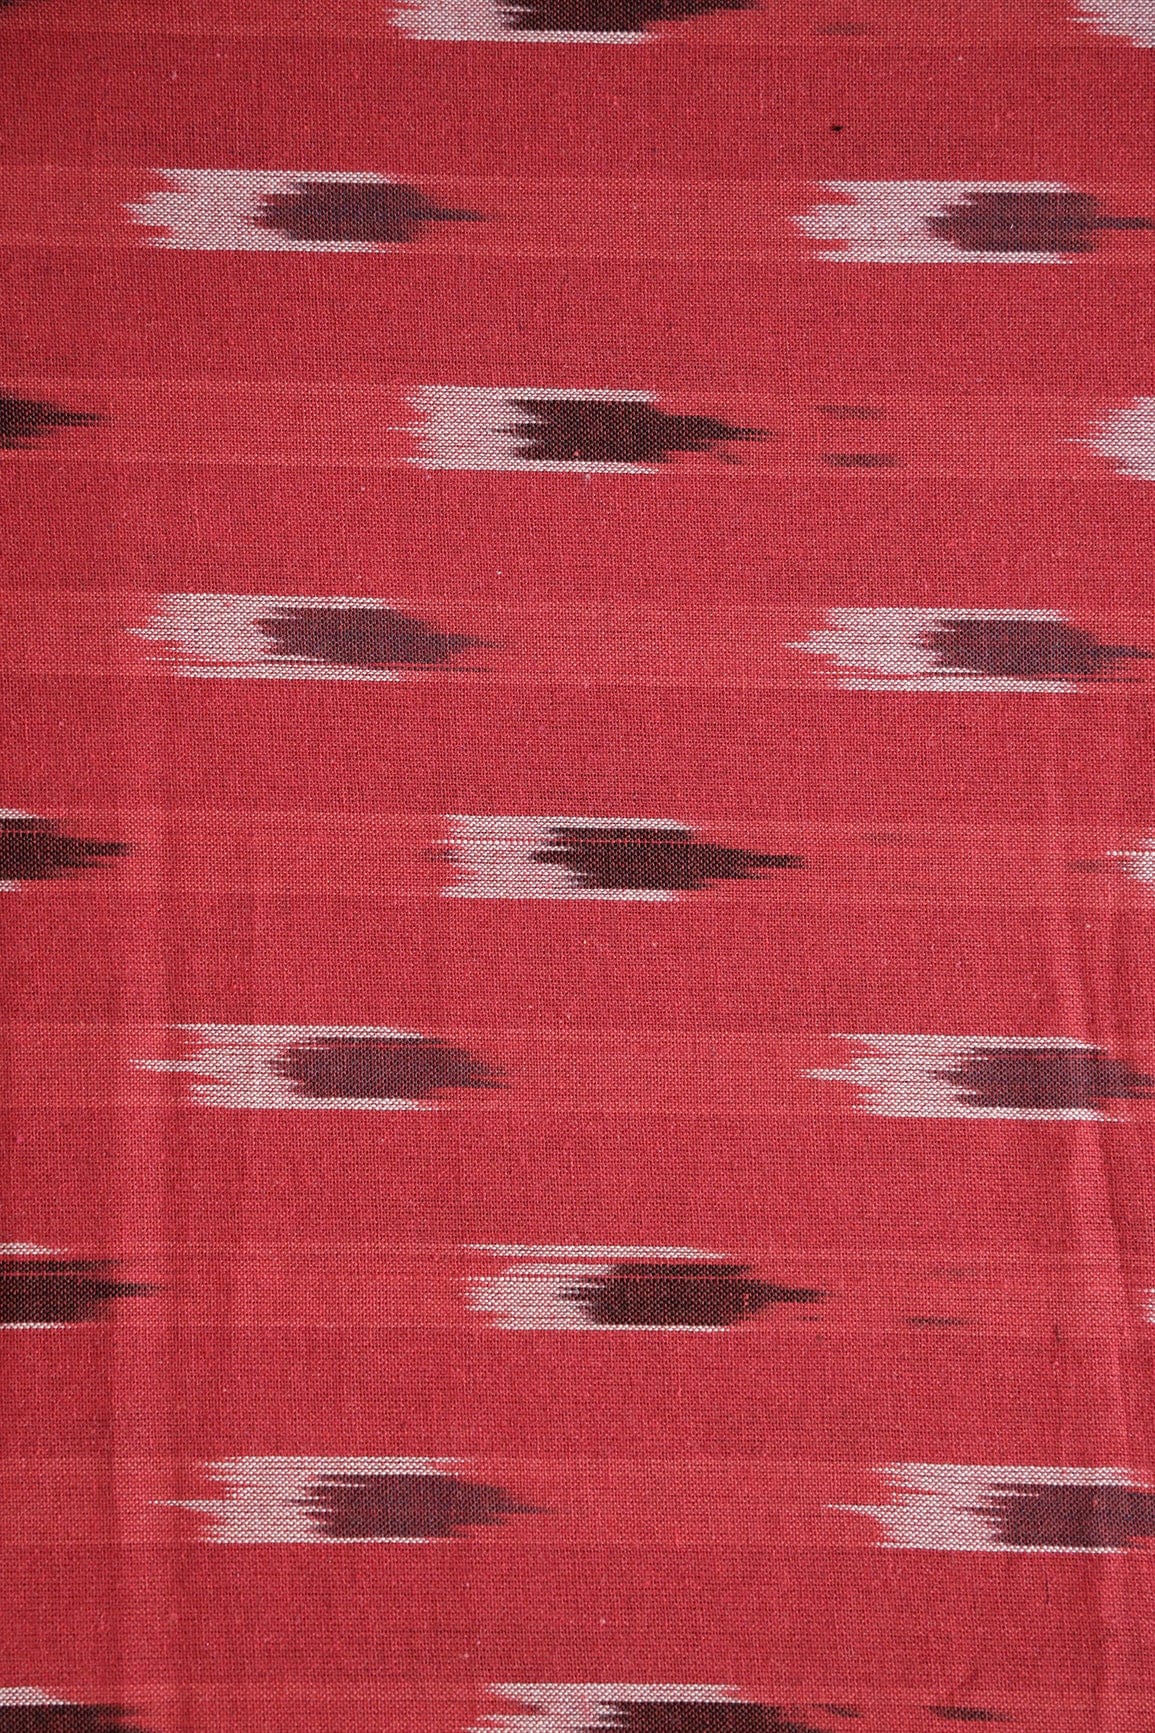 doeraa Hand Woven Red And Black Stripes Pattern Handwoven Ikat Organic Cotton Fabric